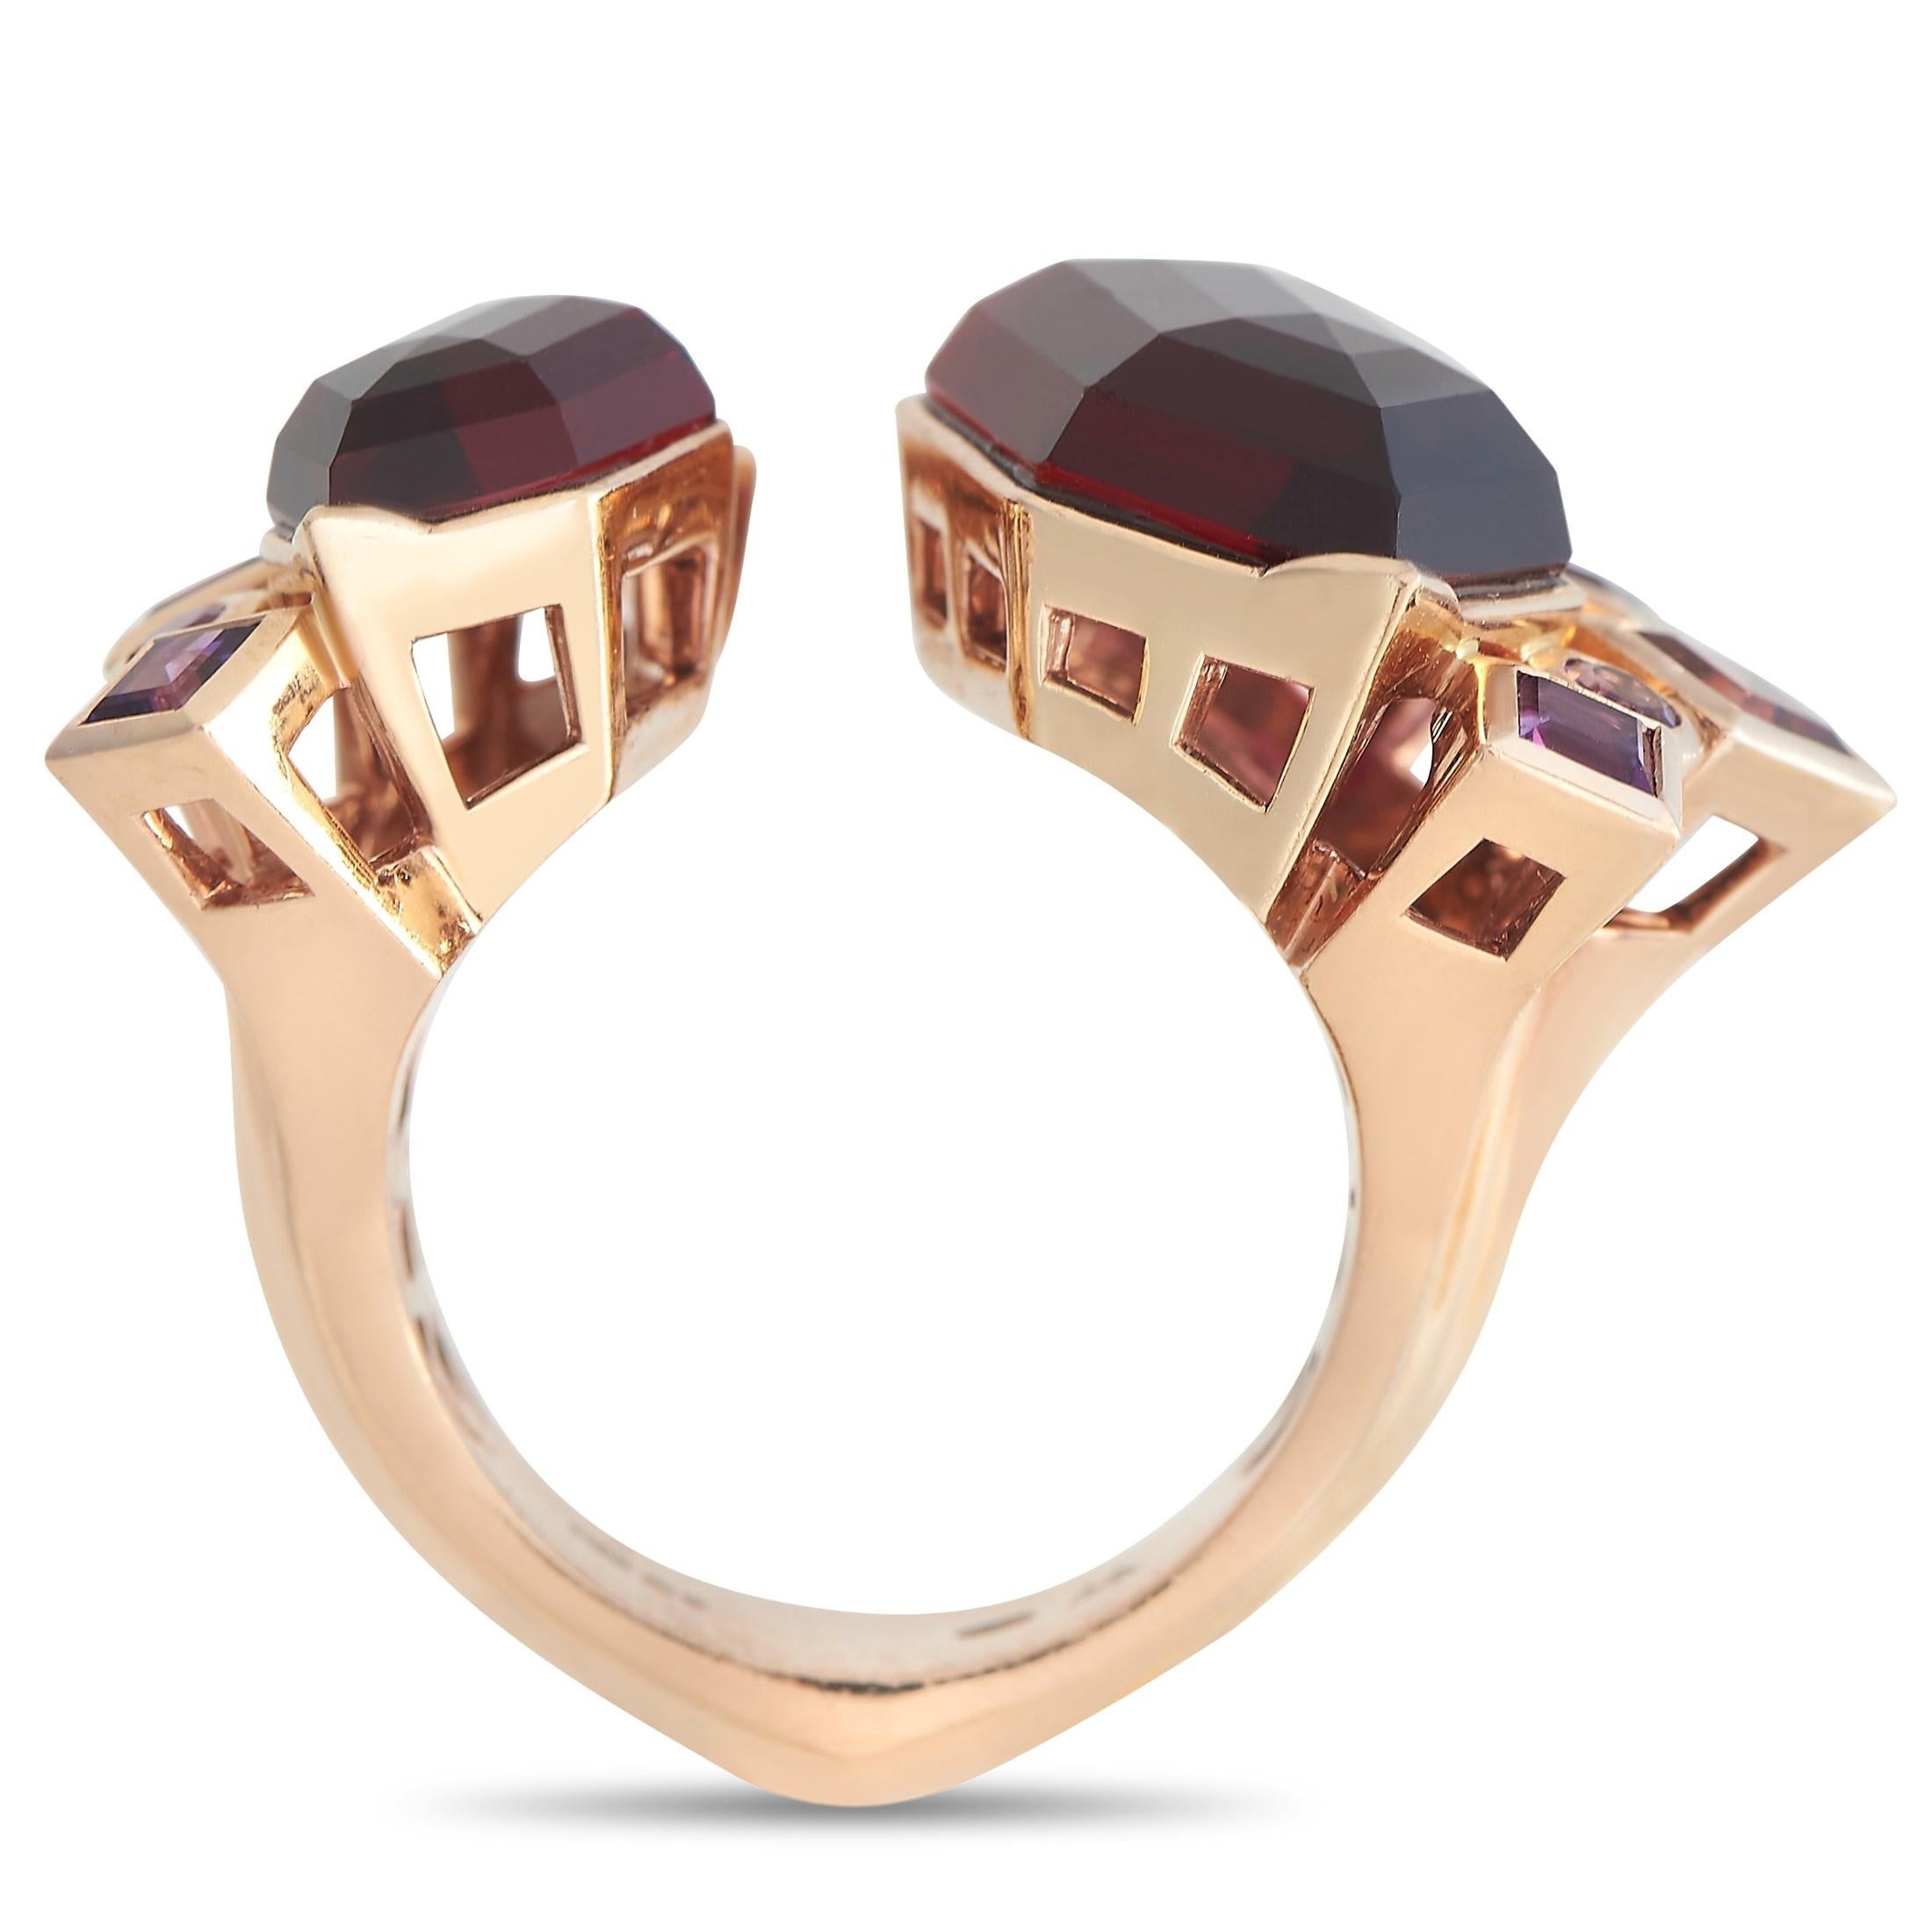 A treasure trove of jewels right at your fingertips. This attention-grabbing piece of jewelry features a 4mm rose gold open shank adorned with garnet and amethyst gemstones set in geometric bezels. This statement-making ring is part of Stephen